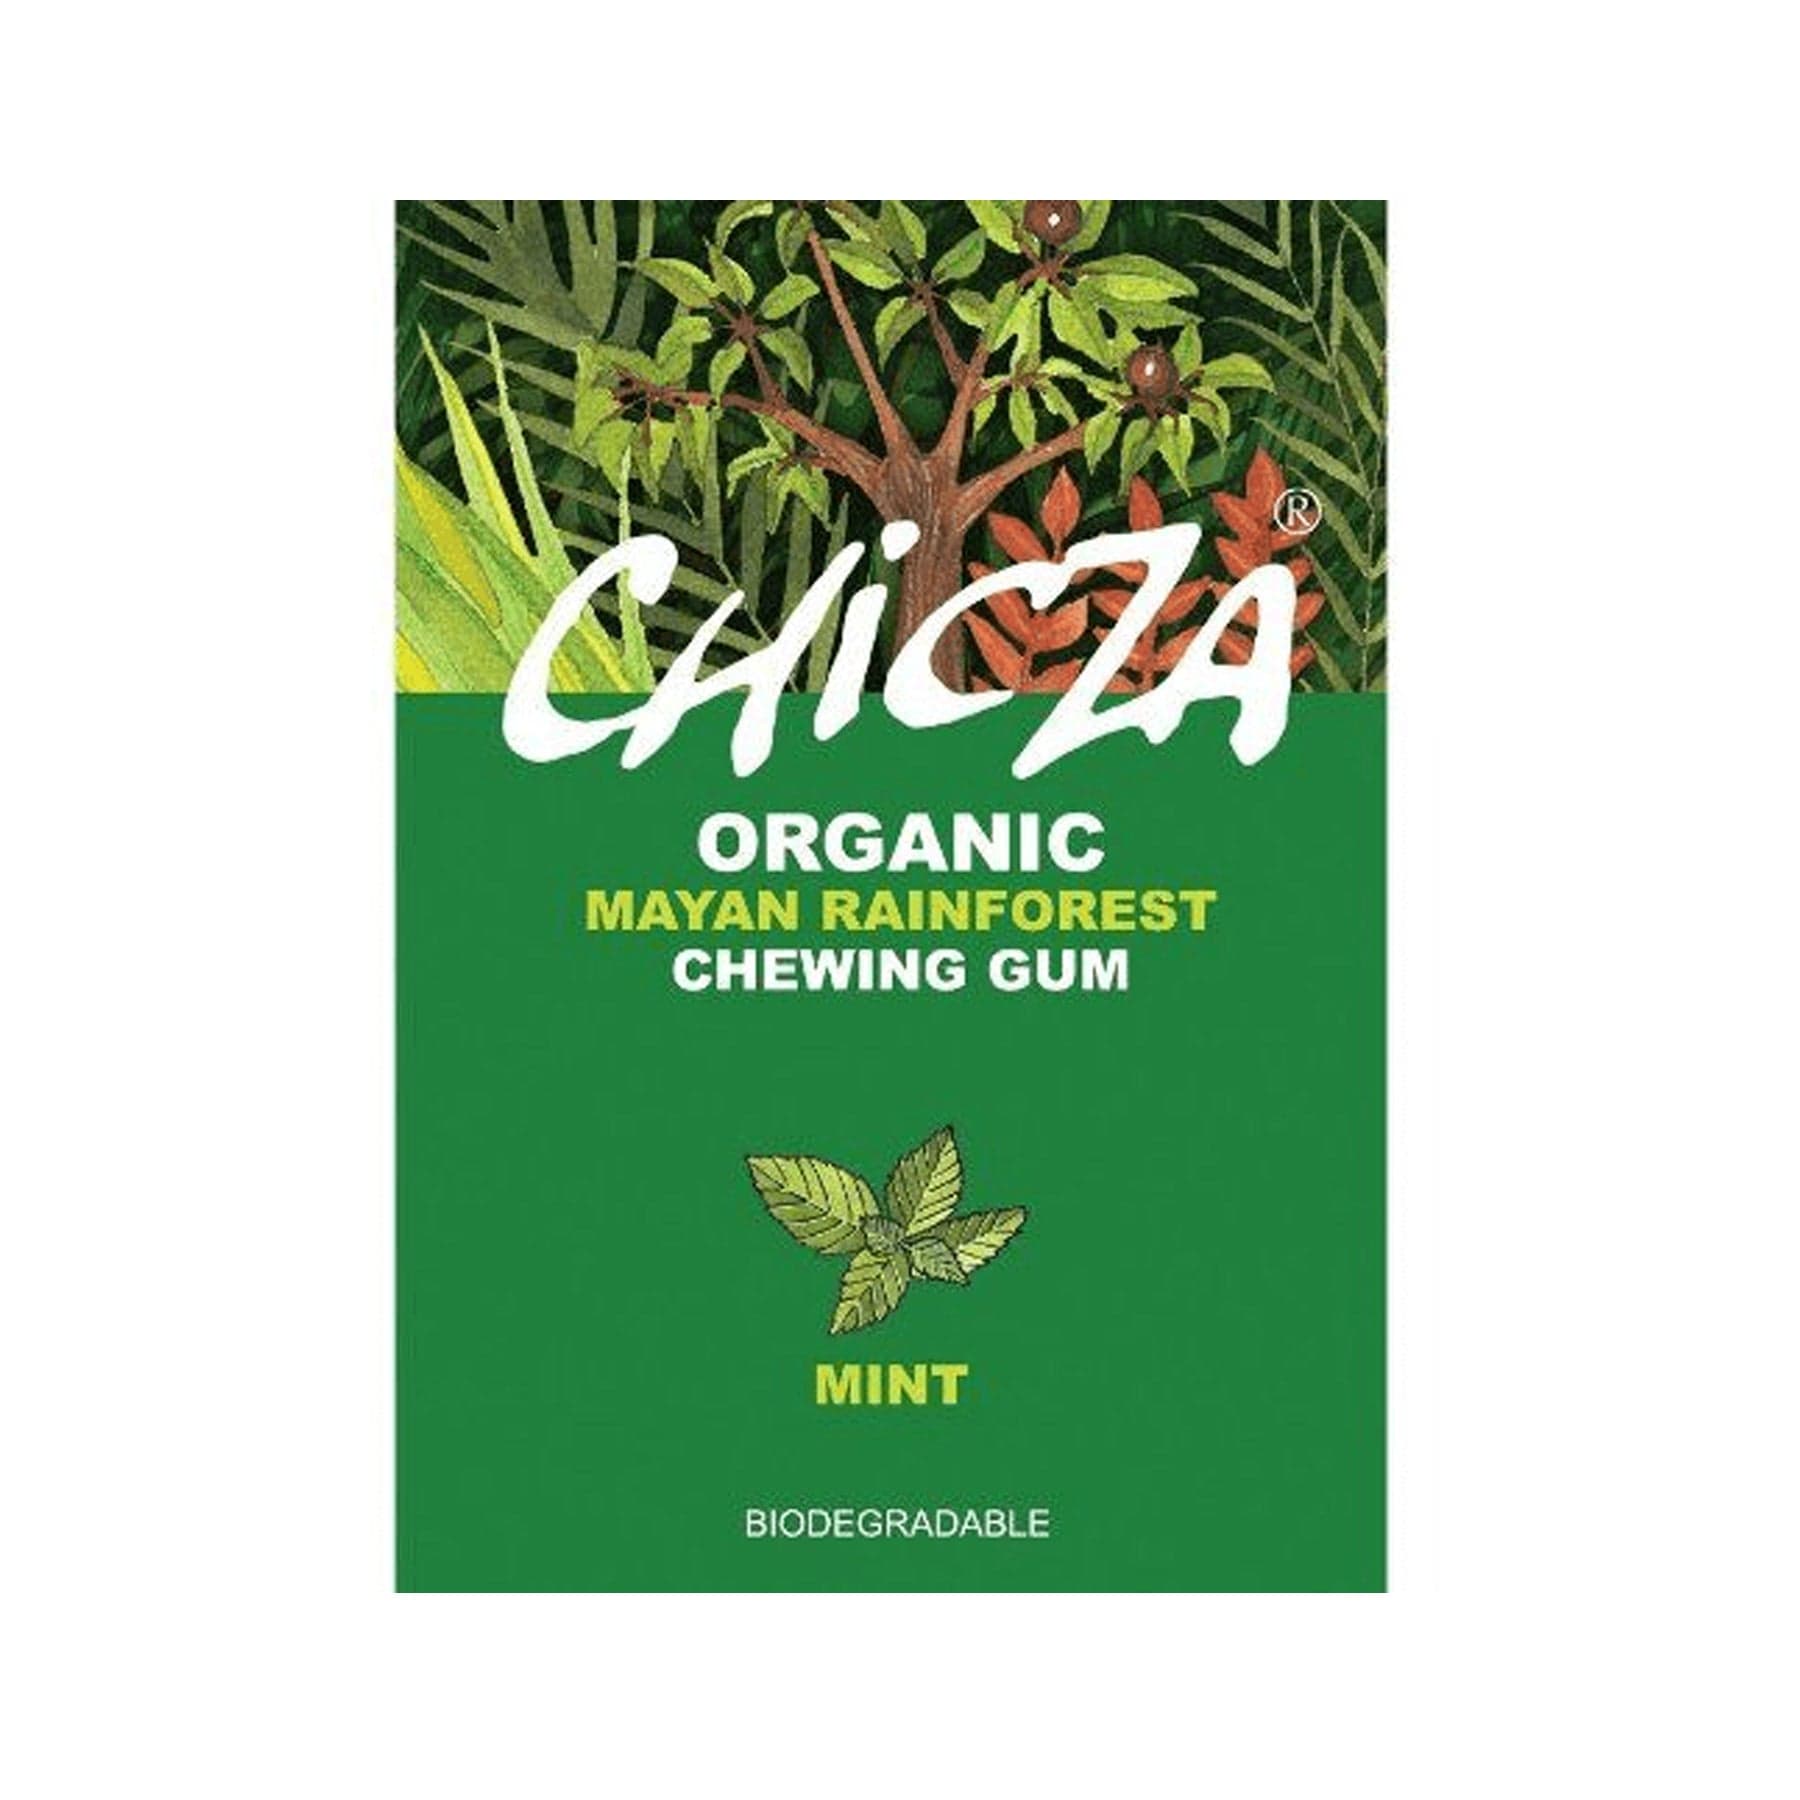 Alt text: Chicza organic Mayan rainforest chewing gum packaging with mint flavor, featuring lush greenery and the biodegradable product claim.